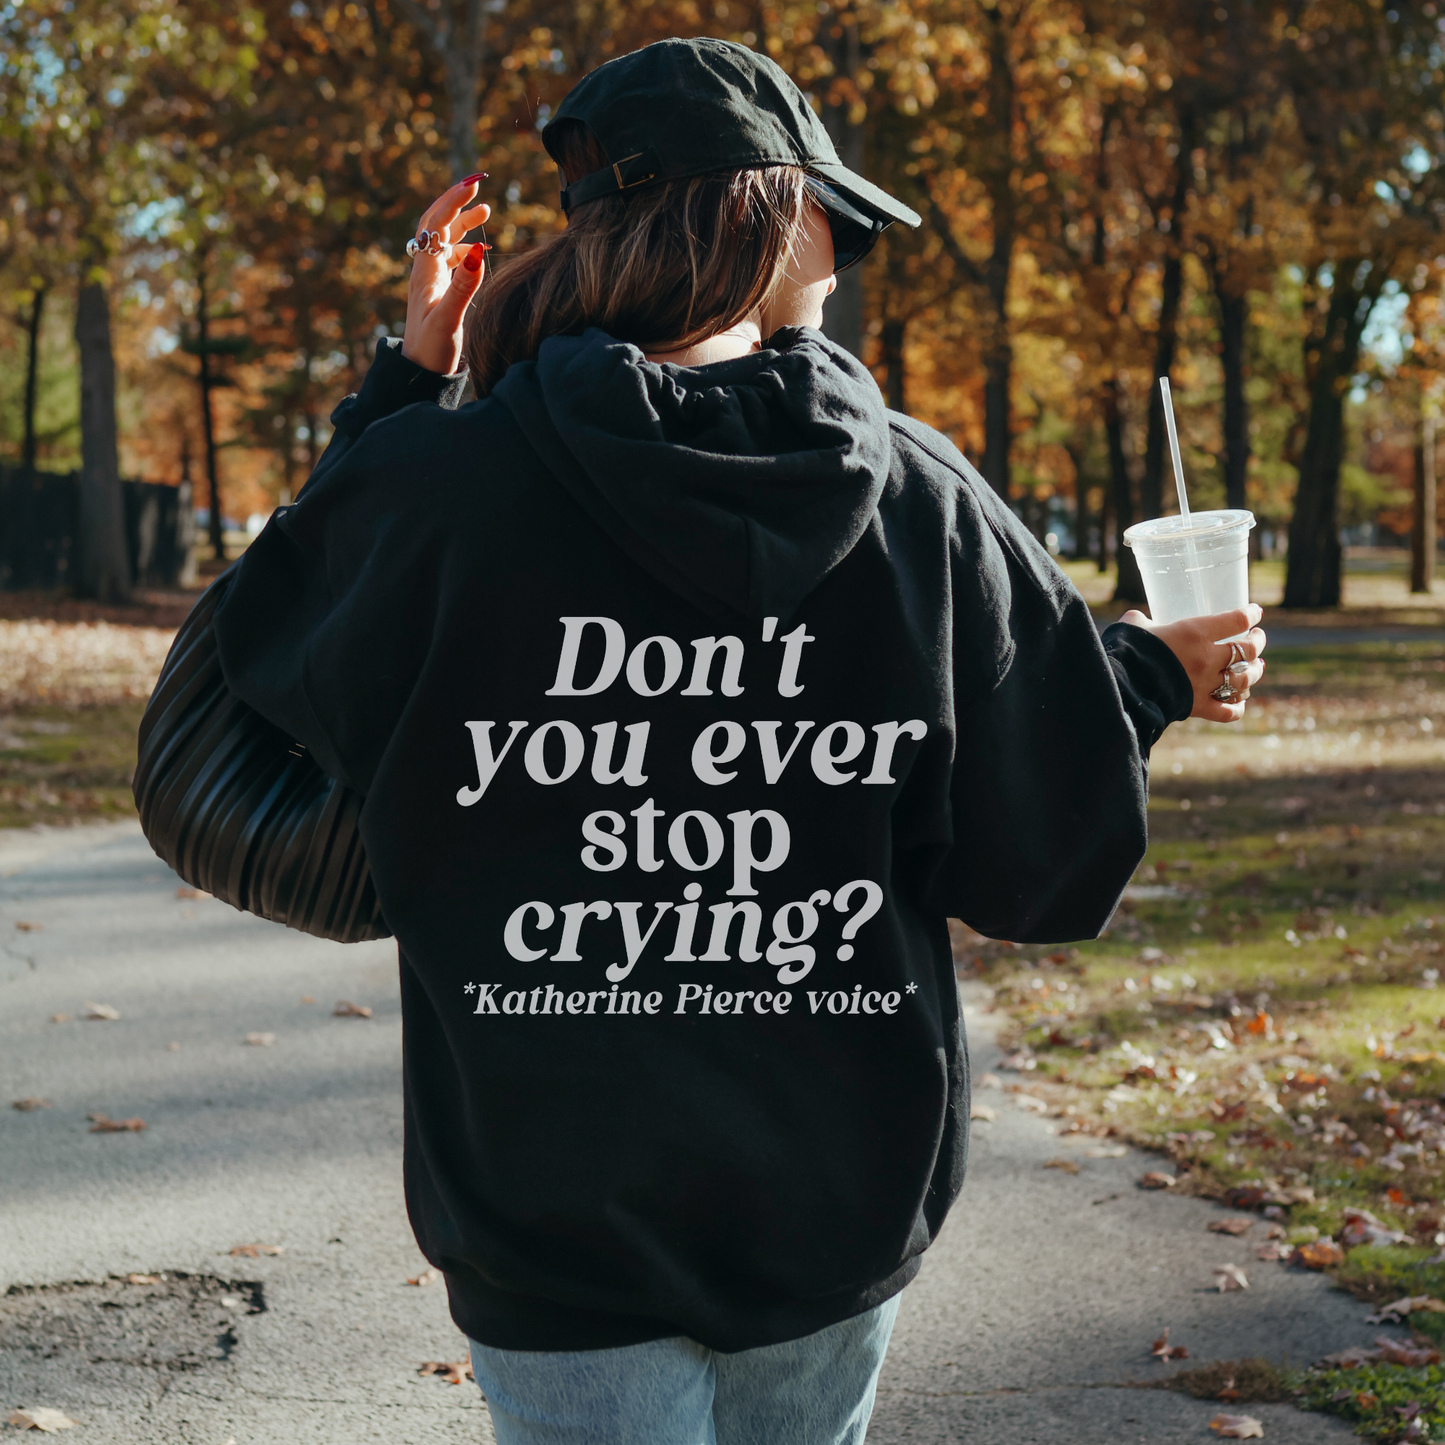 Don't you ever stop crying Hoodie